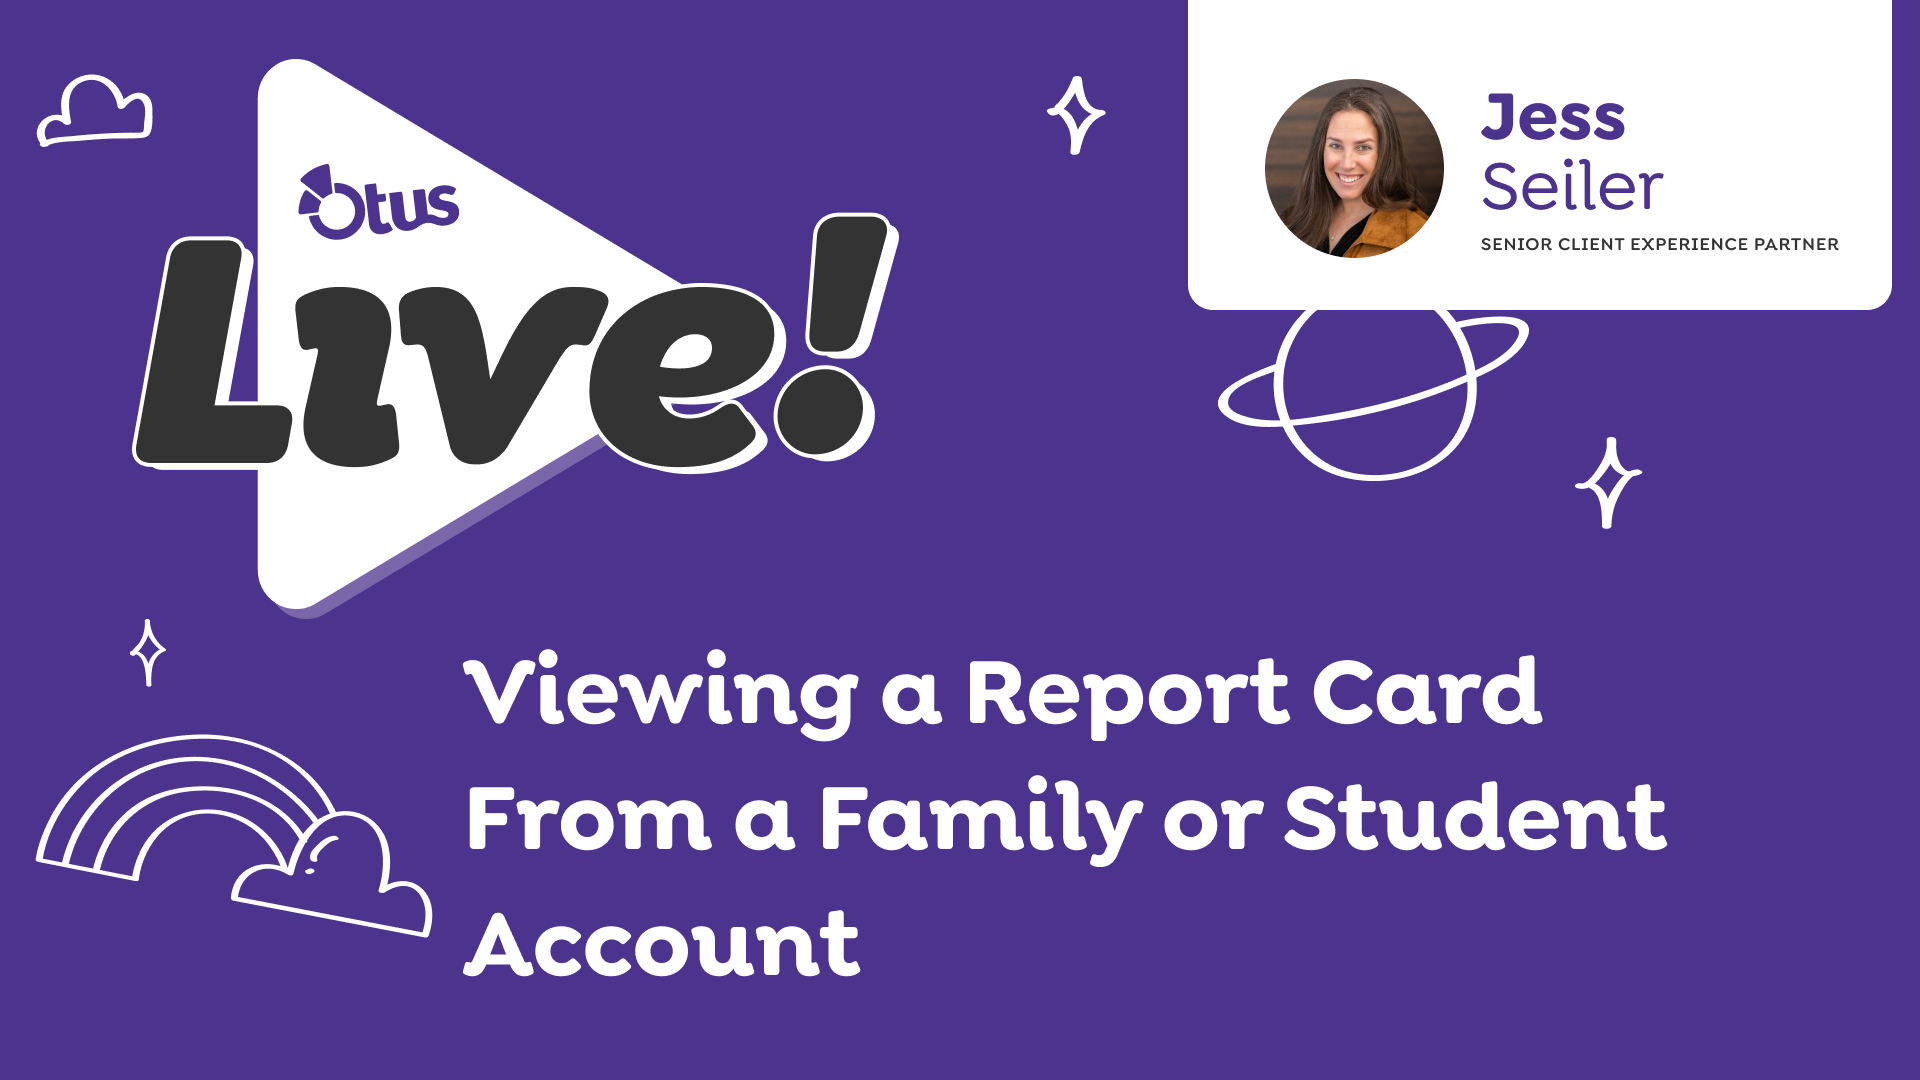 Viewing a Report Card From a Family or Student Account